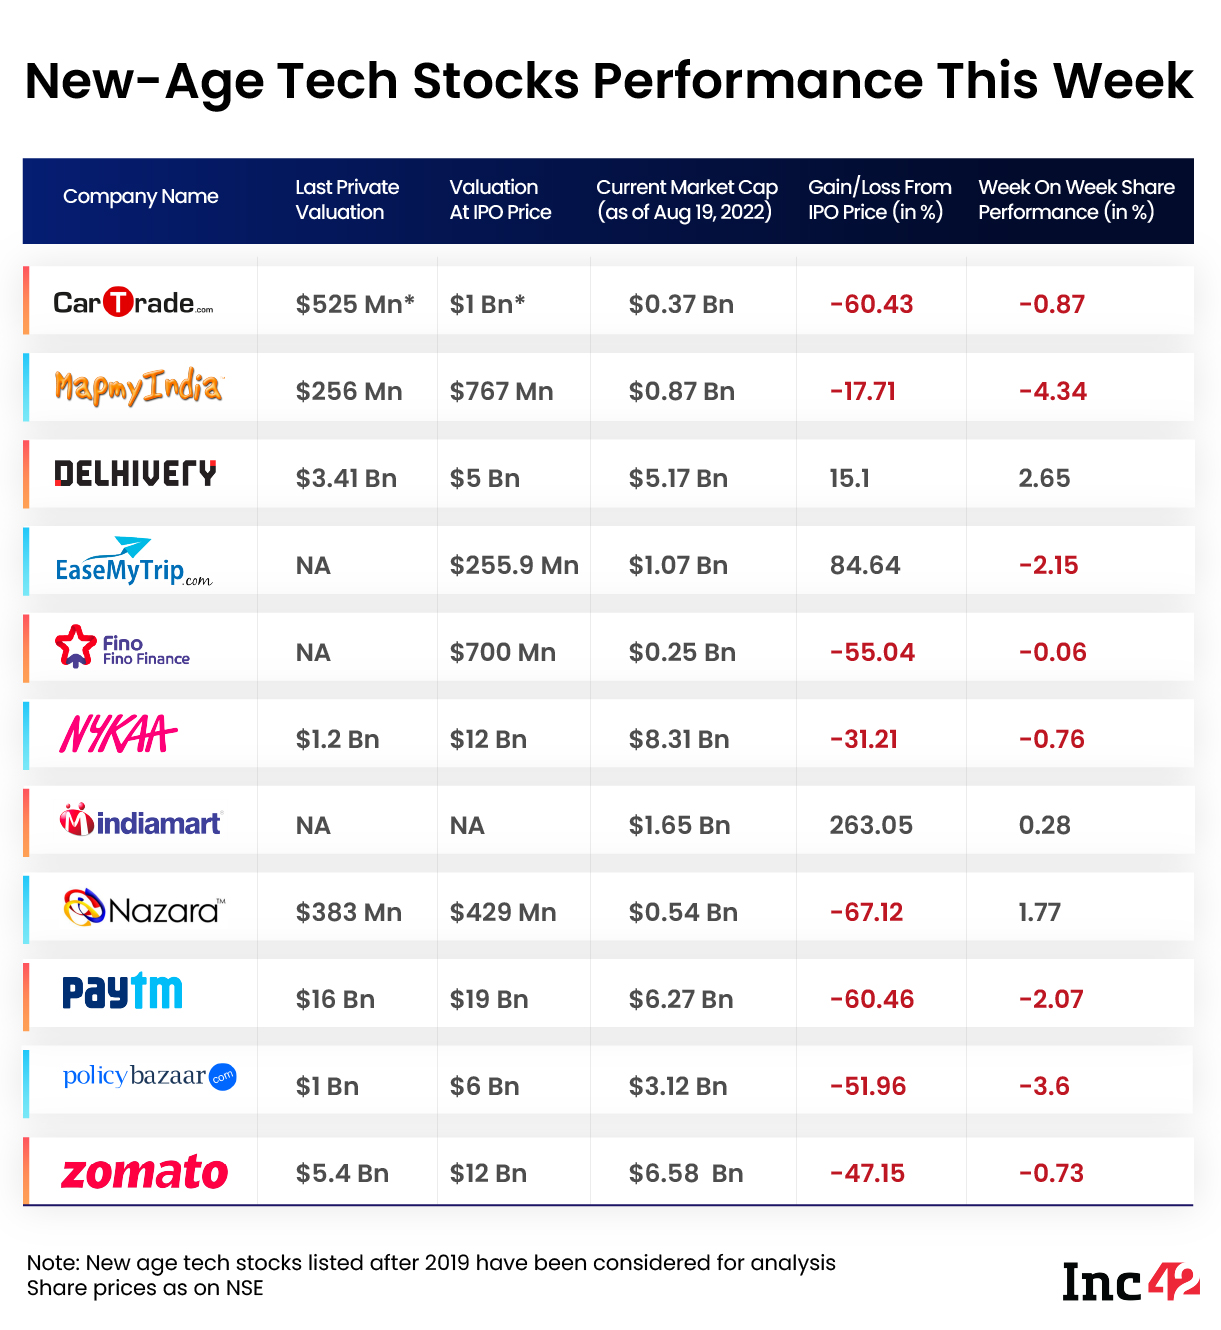 A Meek Week For New-Age Tech Stocks; MapmyIndia Biggest Loser, Delhivery Gains